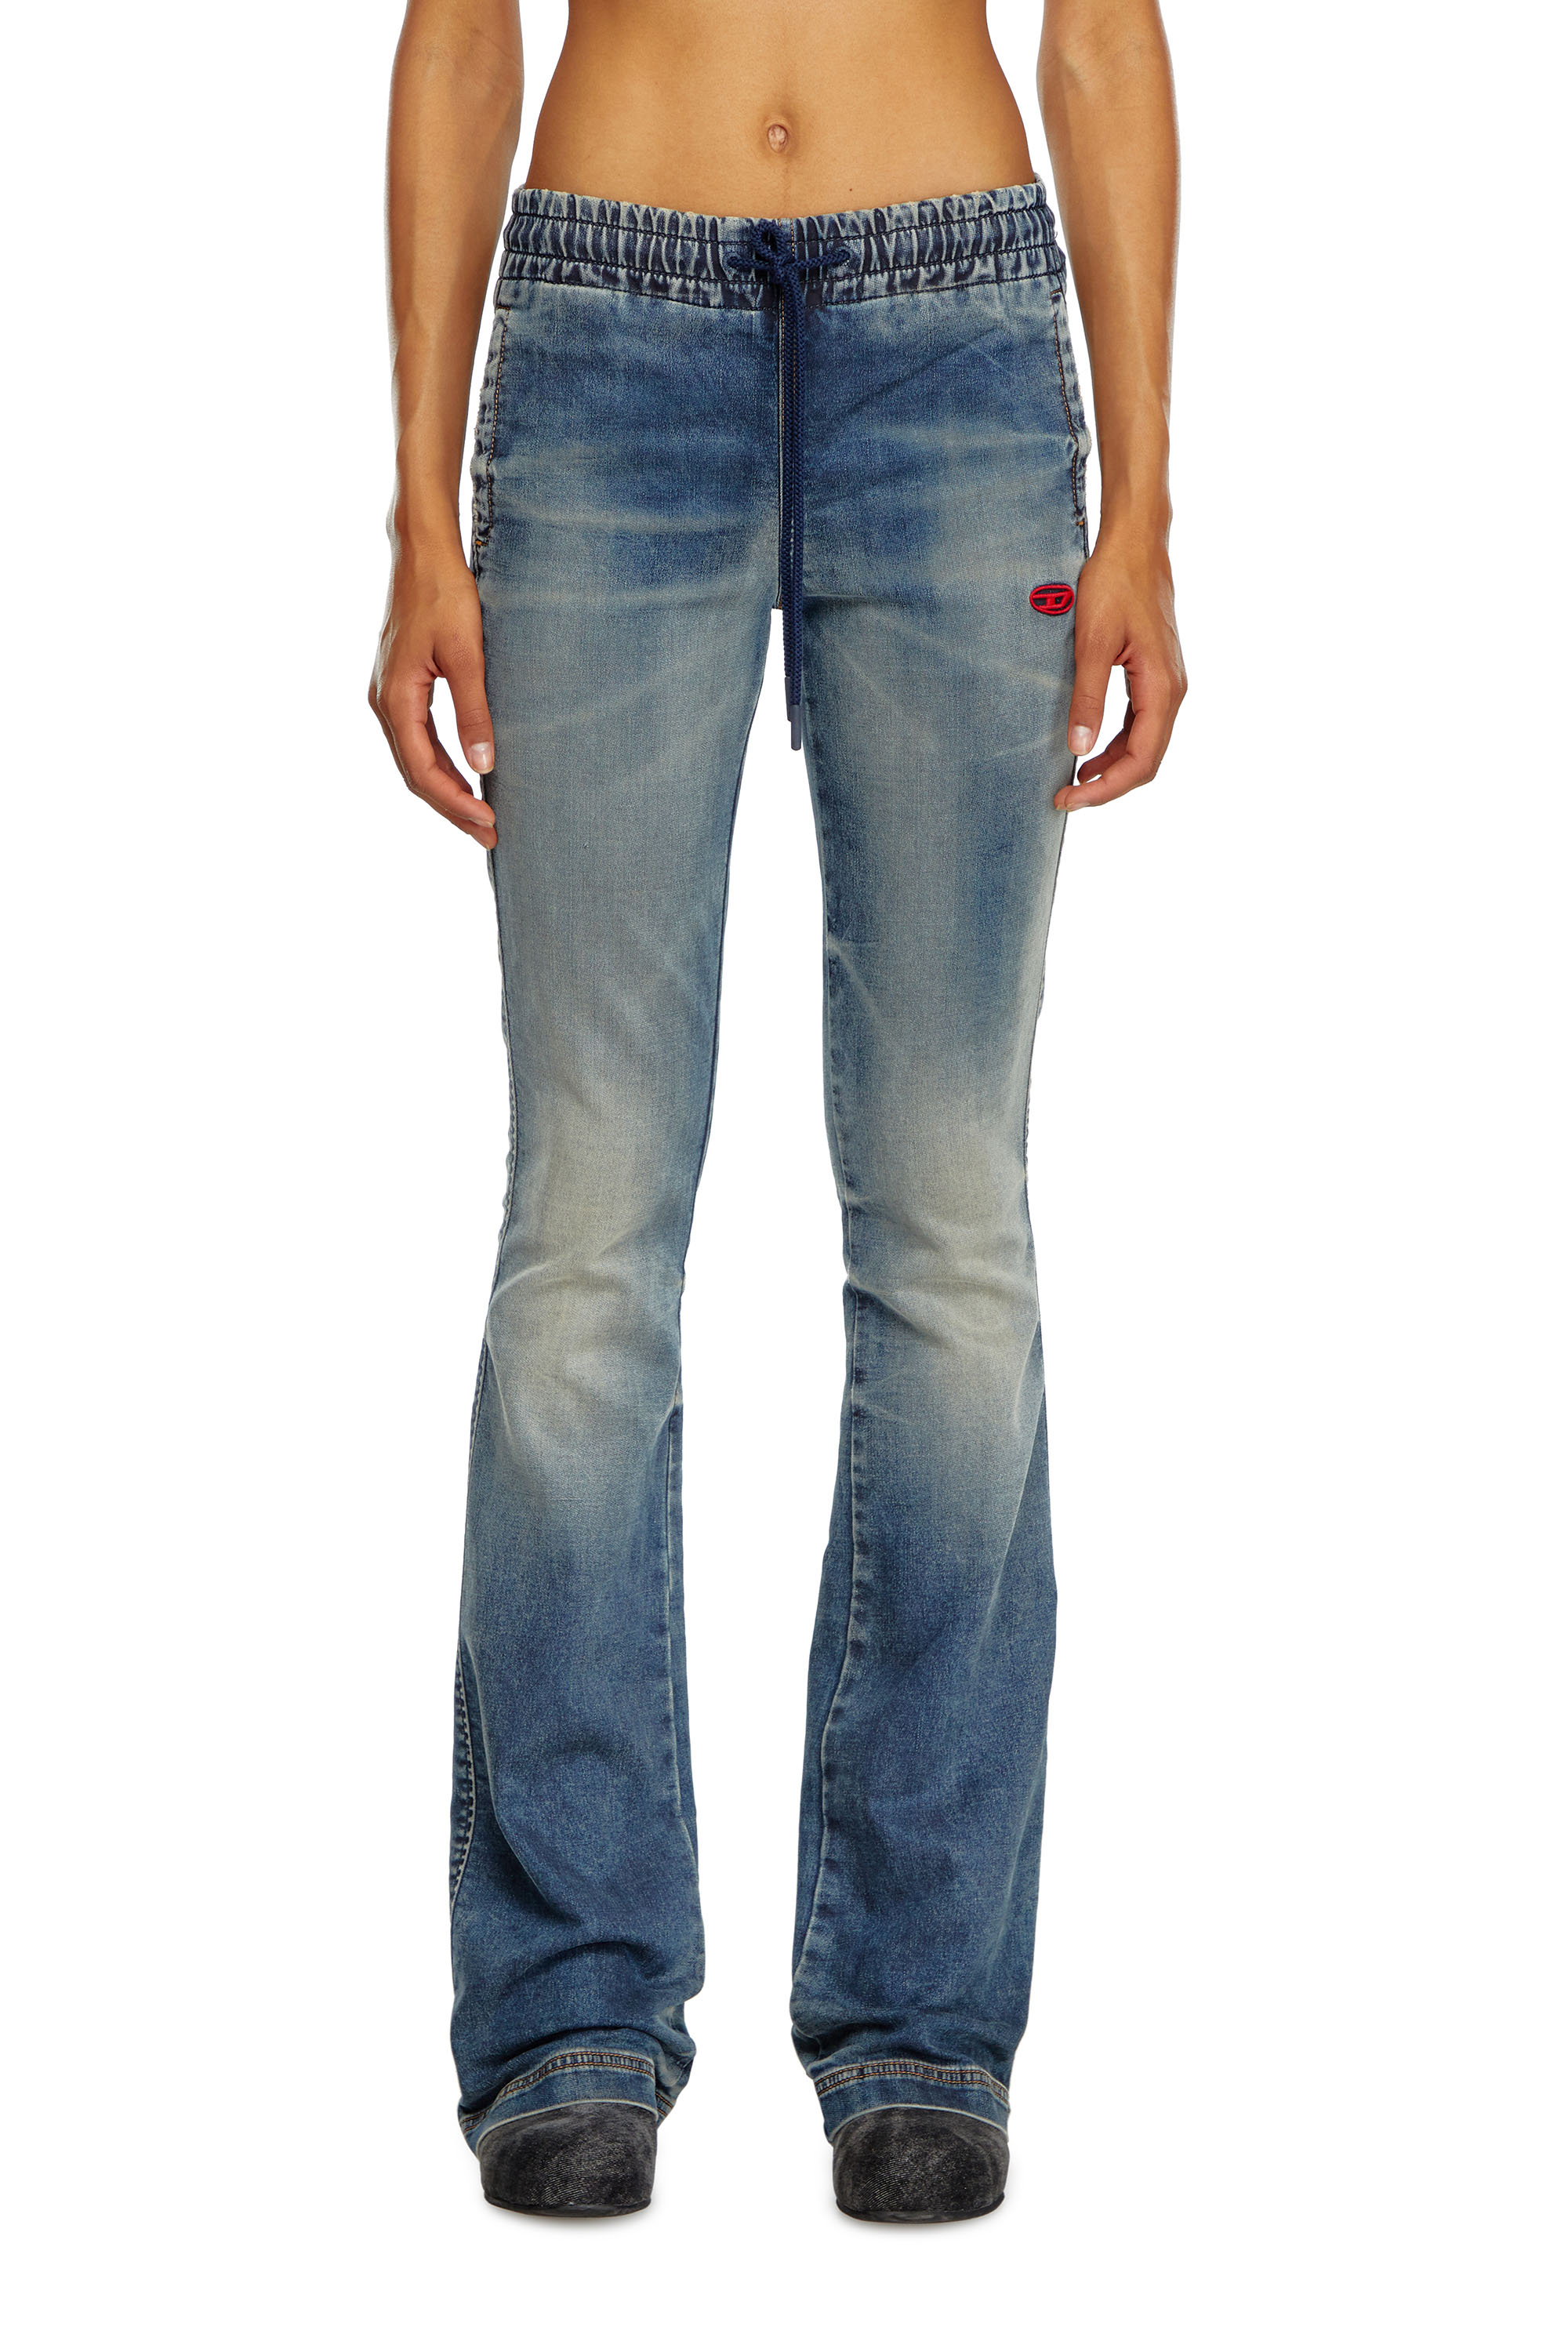 Diesel - Bootcut and Flare 2069 D-Ebbey Joggjeans® 068LZ, Mujer Bootcut y Flare 2069 D-Ebbey Joggjeans® in Azul marino - Image 1